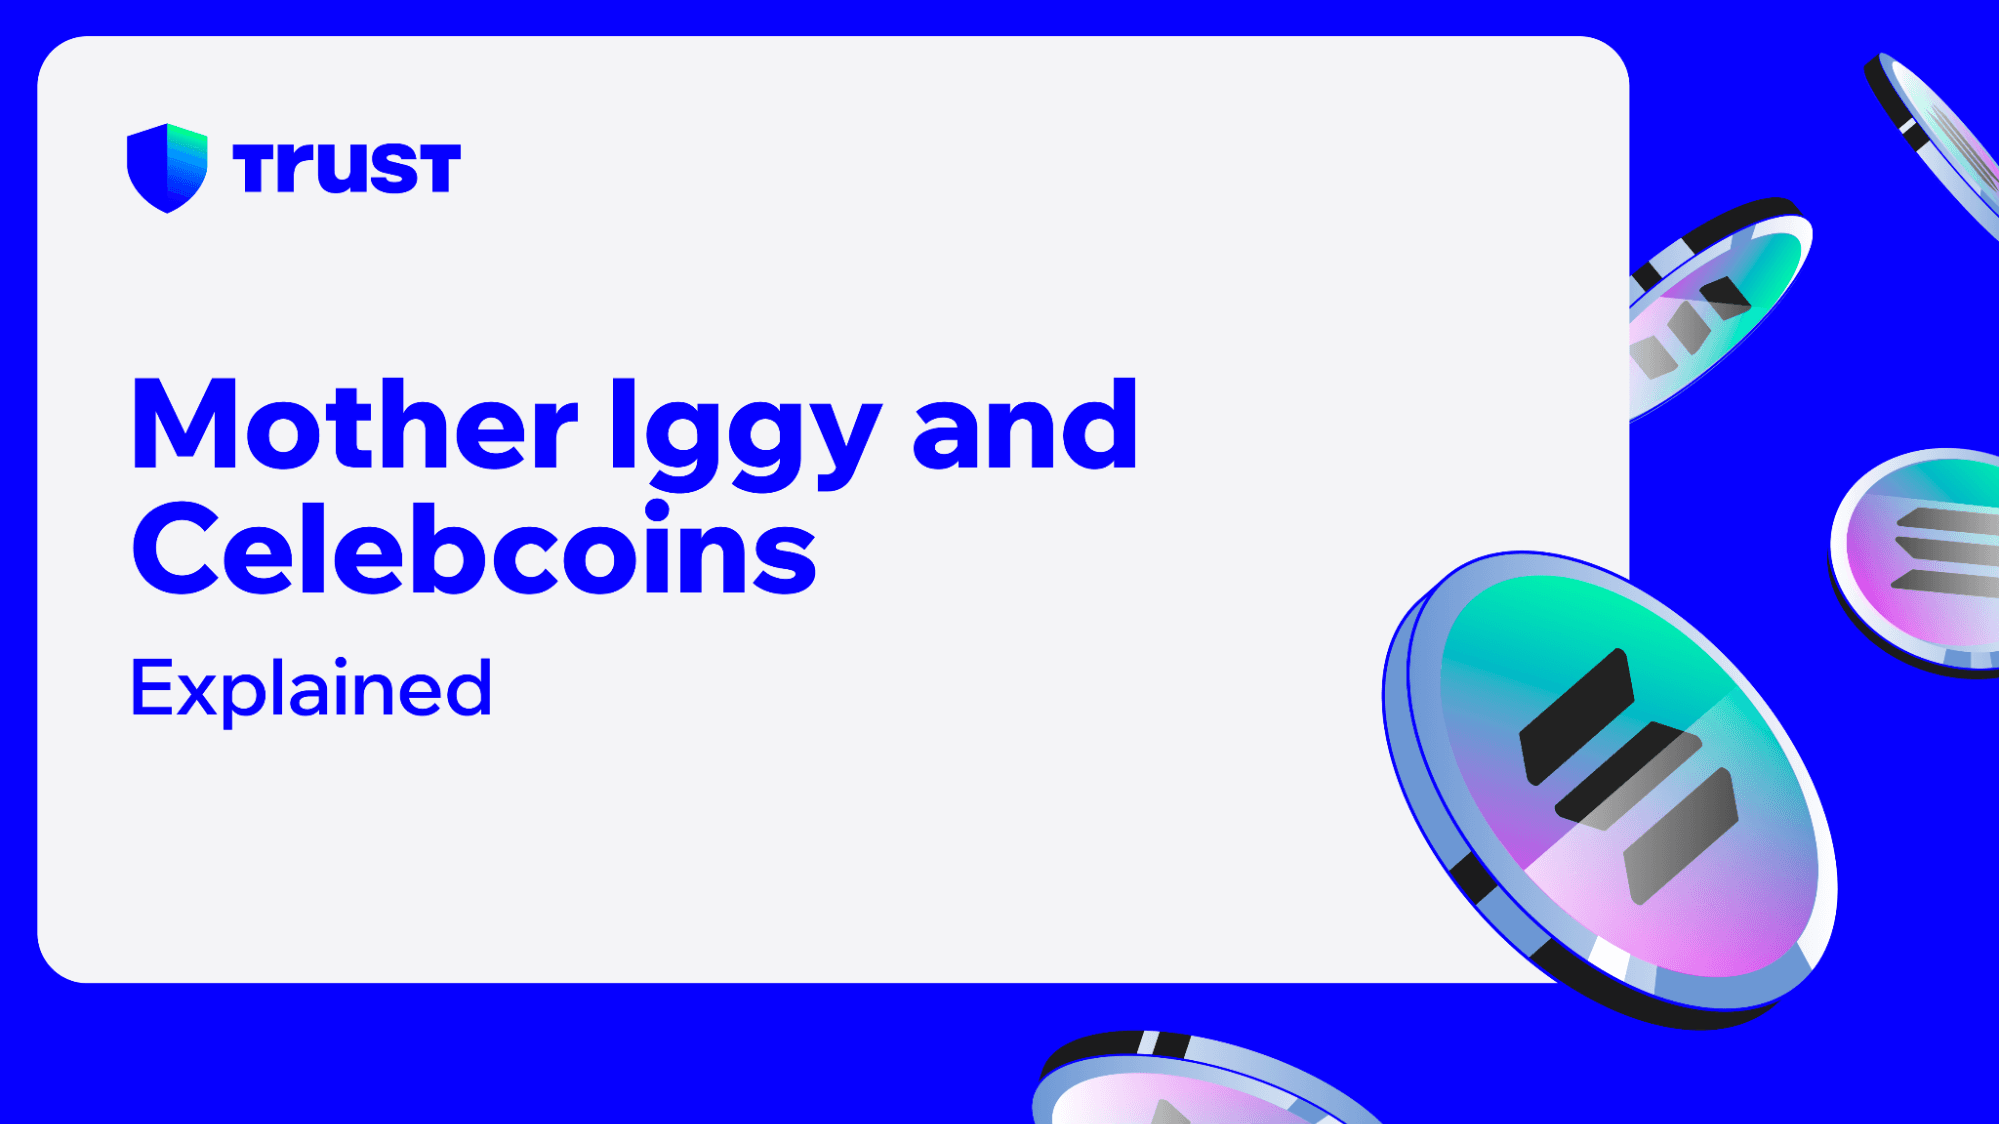 Mother Iggy and Celebcoins: Explained